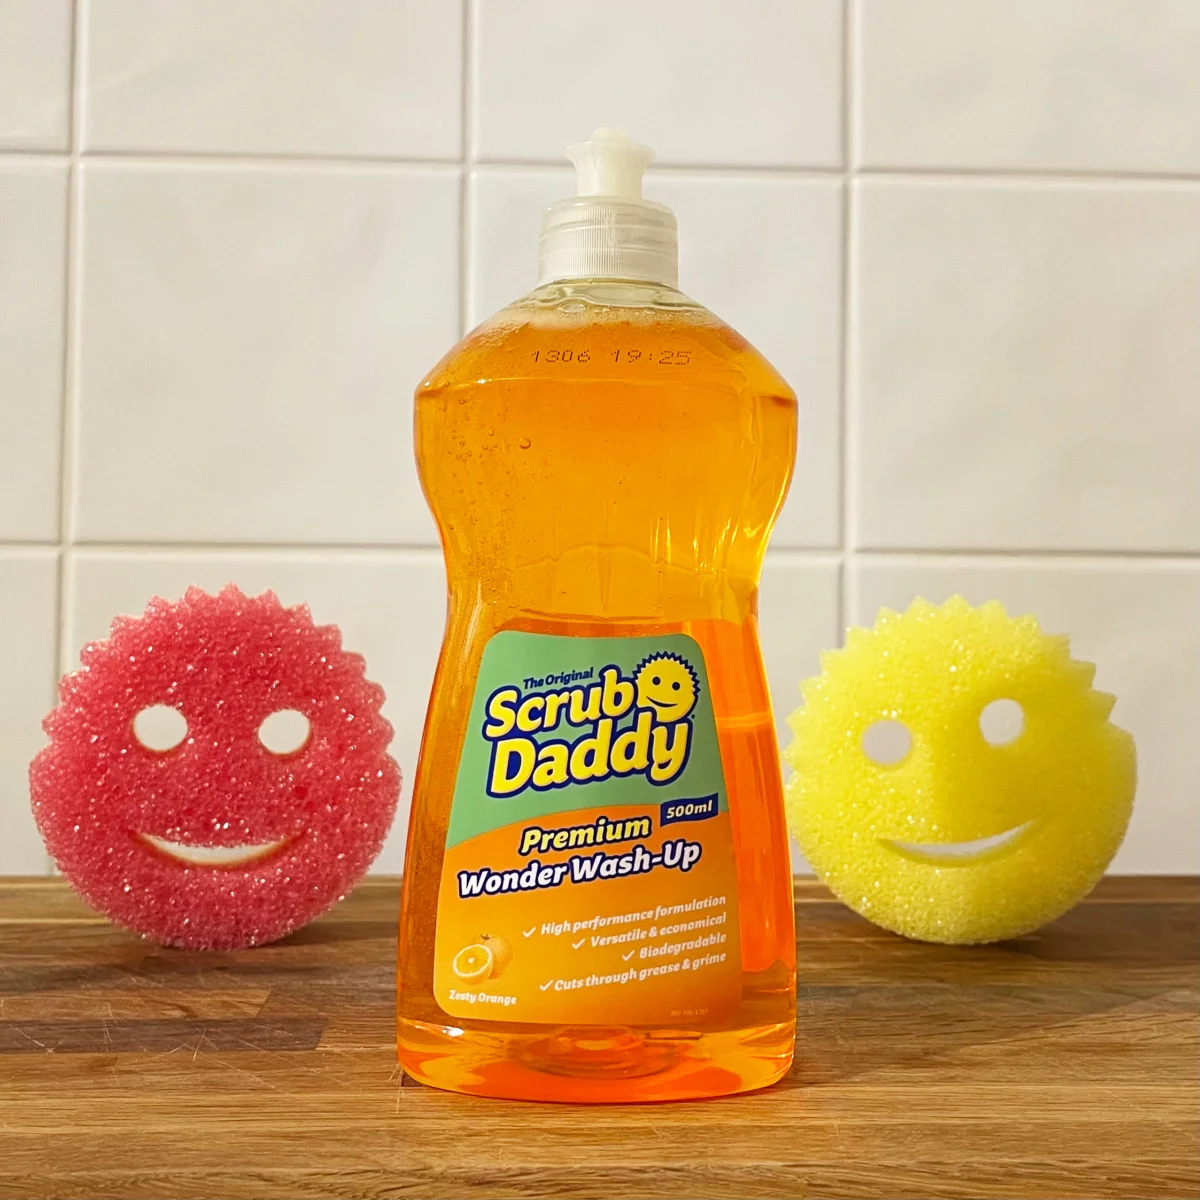 Soap Daddy and Dish Soap